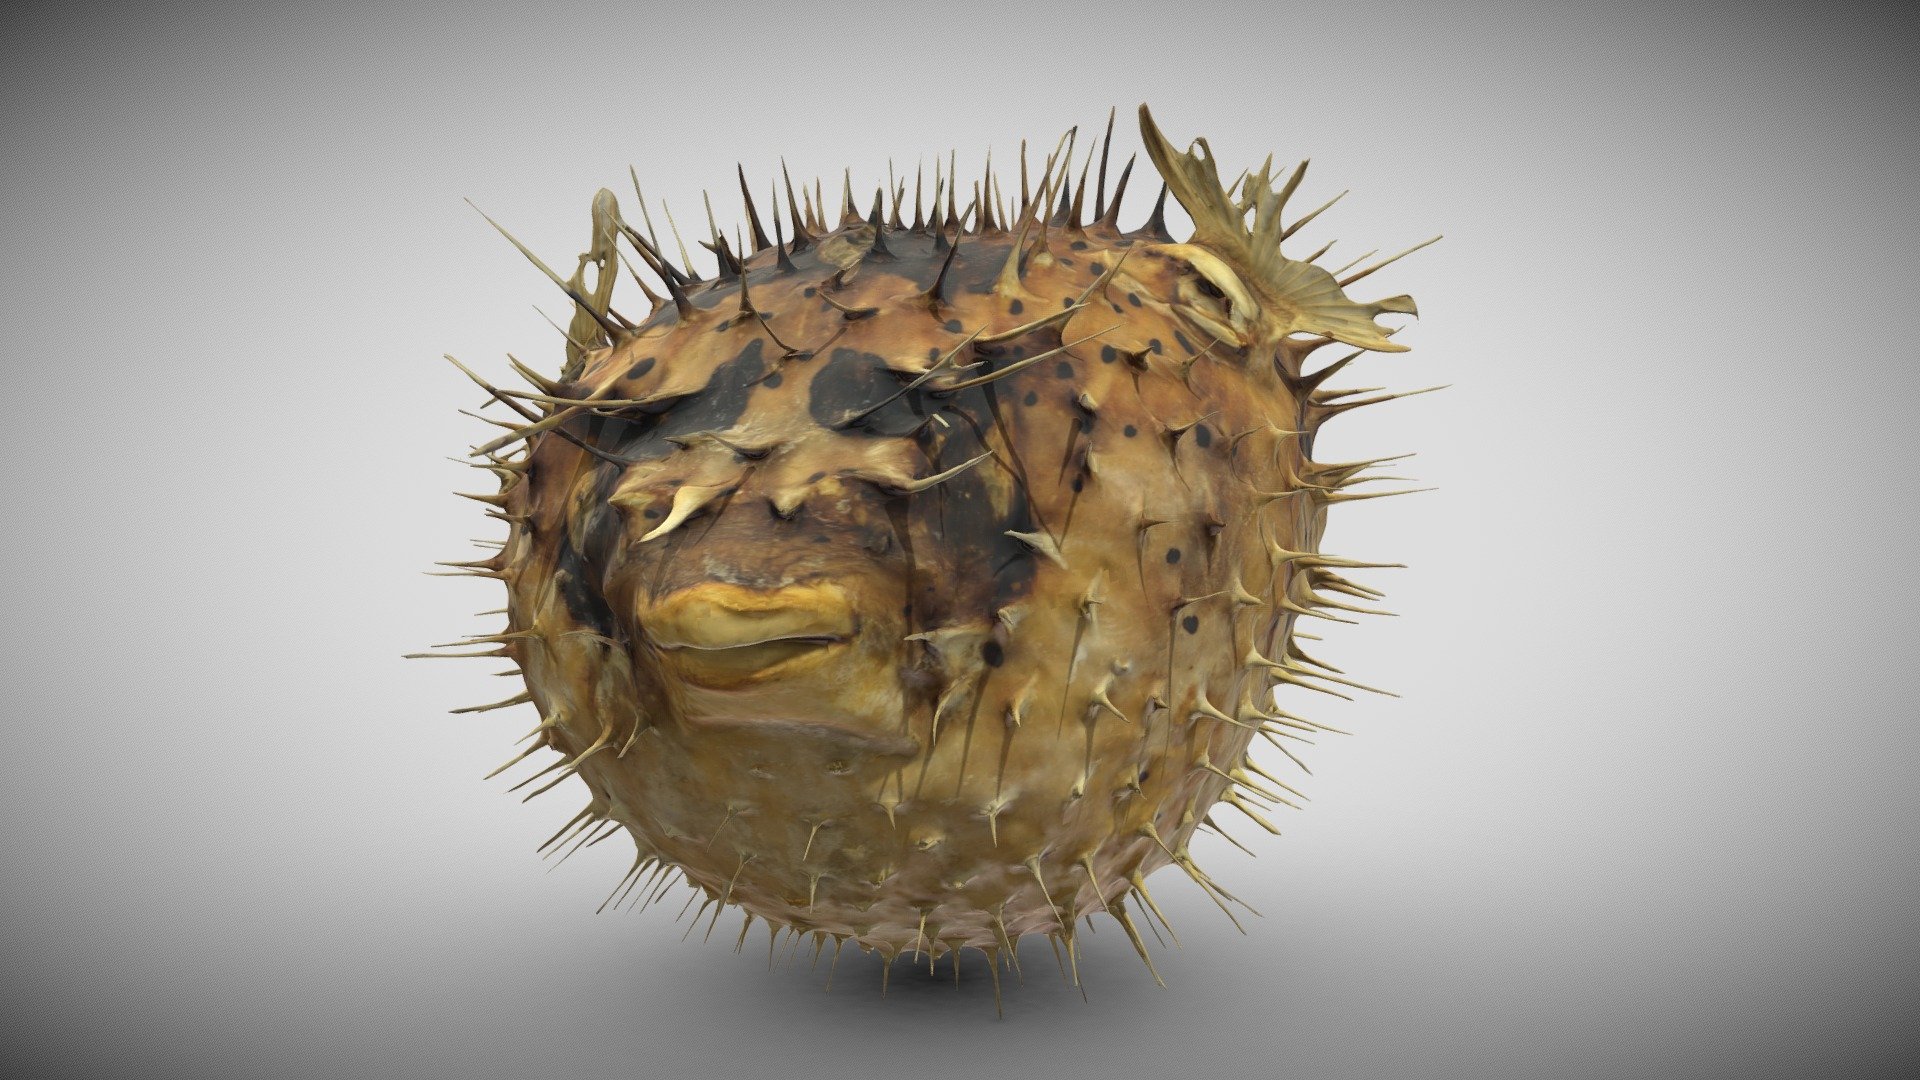 Upon request, we scanned this 40yrs old pufferfish.

Please leave a comment and visit us on our website https://meshfinder.de/ - Pufferfish (Photogrammetry) - Buy Royalty Free 3D model by Meshfinder 3d model